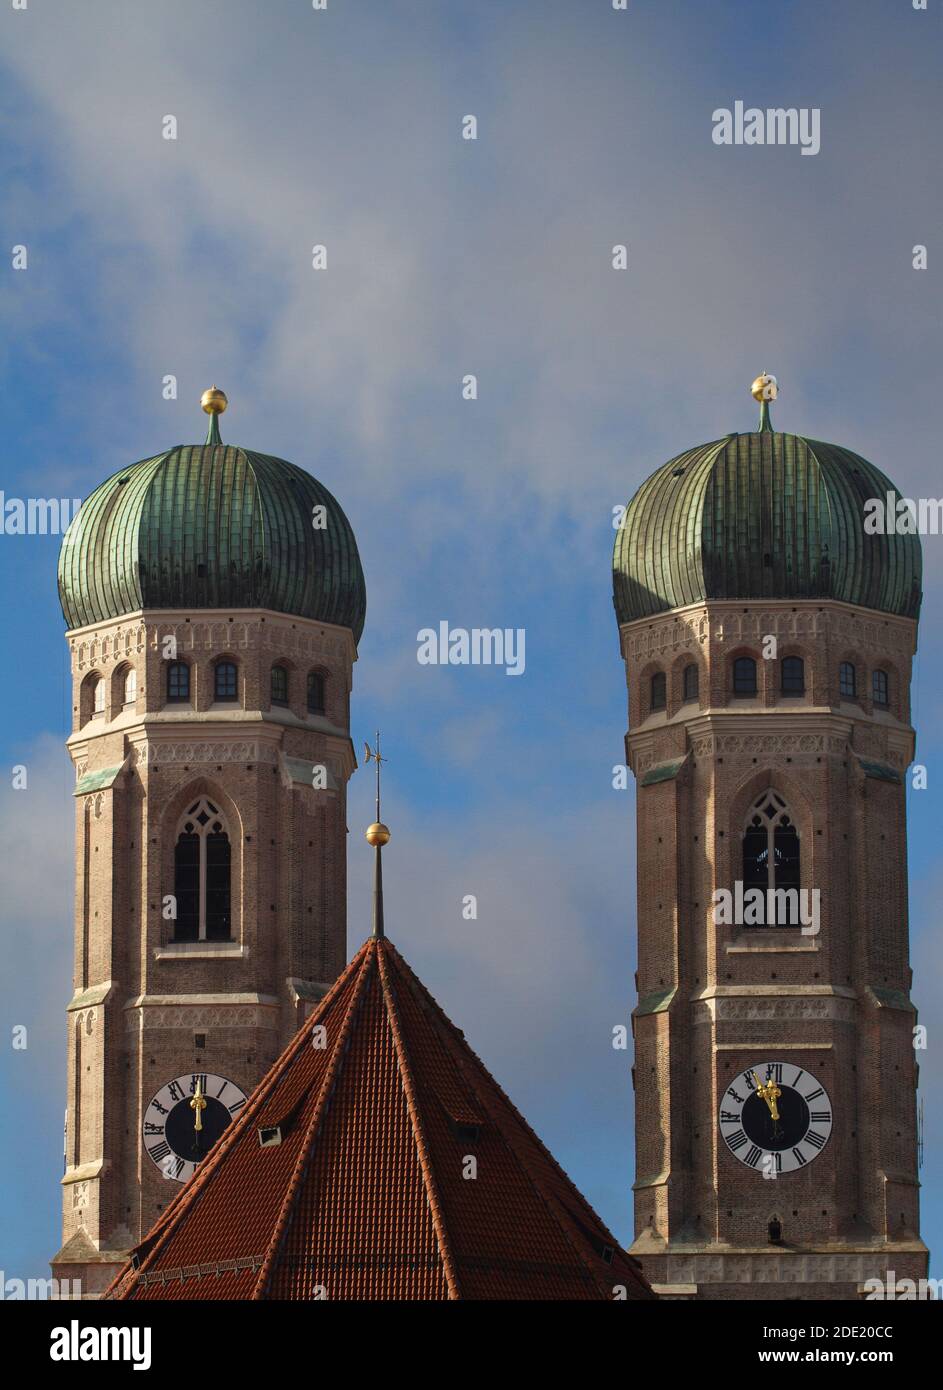 The twin towers of the Munich Frauenkirche. The Frauenkirch is the main landmark of the Bavarian city.  Set against a blue sky with copy space. Stock Photo